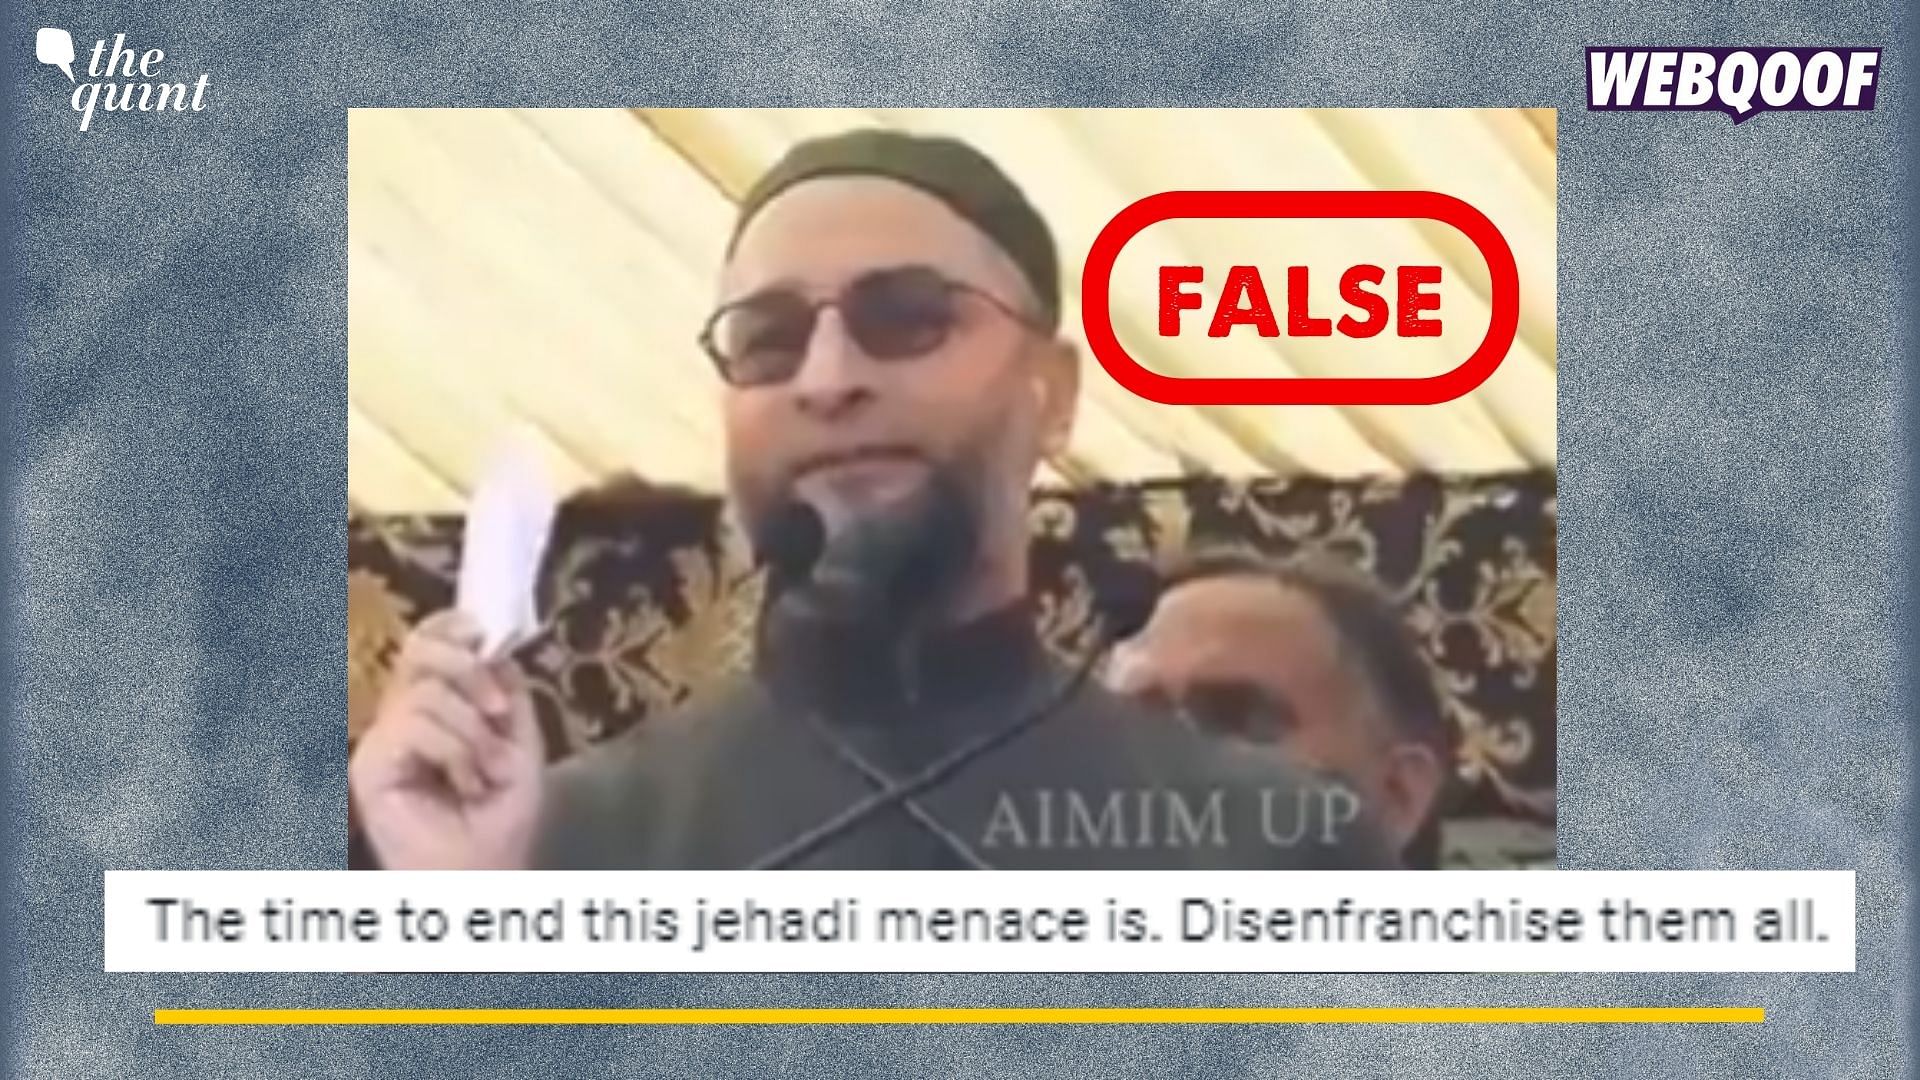 Clipped Video Of Owaisi's Speech from 2021 Revived, Shared With Communal Angle